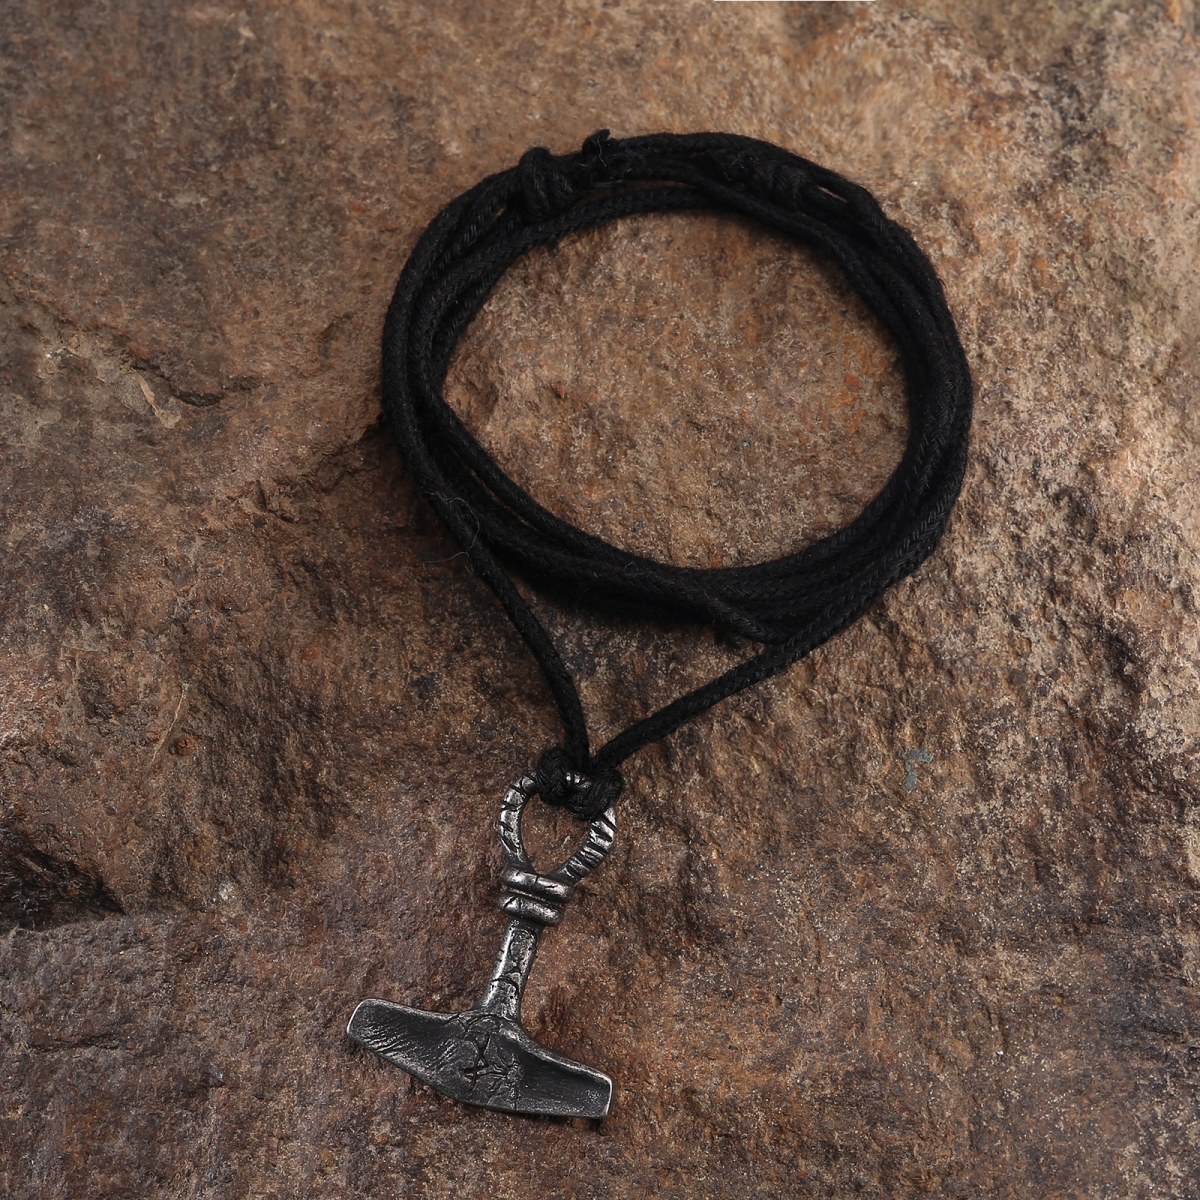 Why choose us as your viking jewelry supplier-NORSECOLLECTION- Viking Jewelry,Viking Necklace,Viking Bracelet,Viking Rings,Viking Mugs,Viking Accessories,Viking Crafts